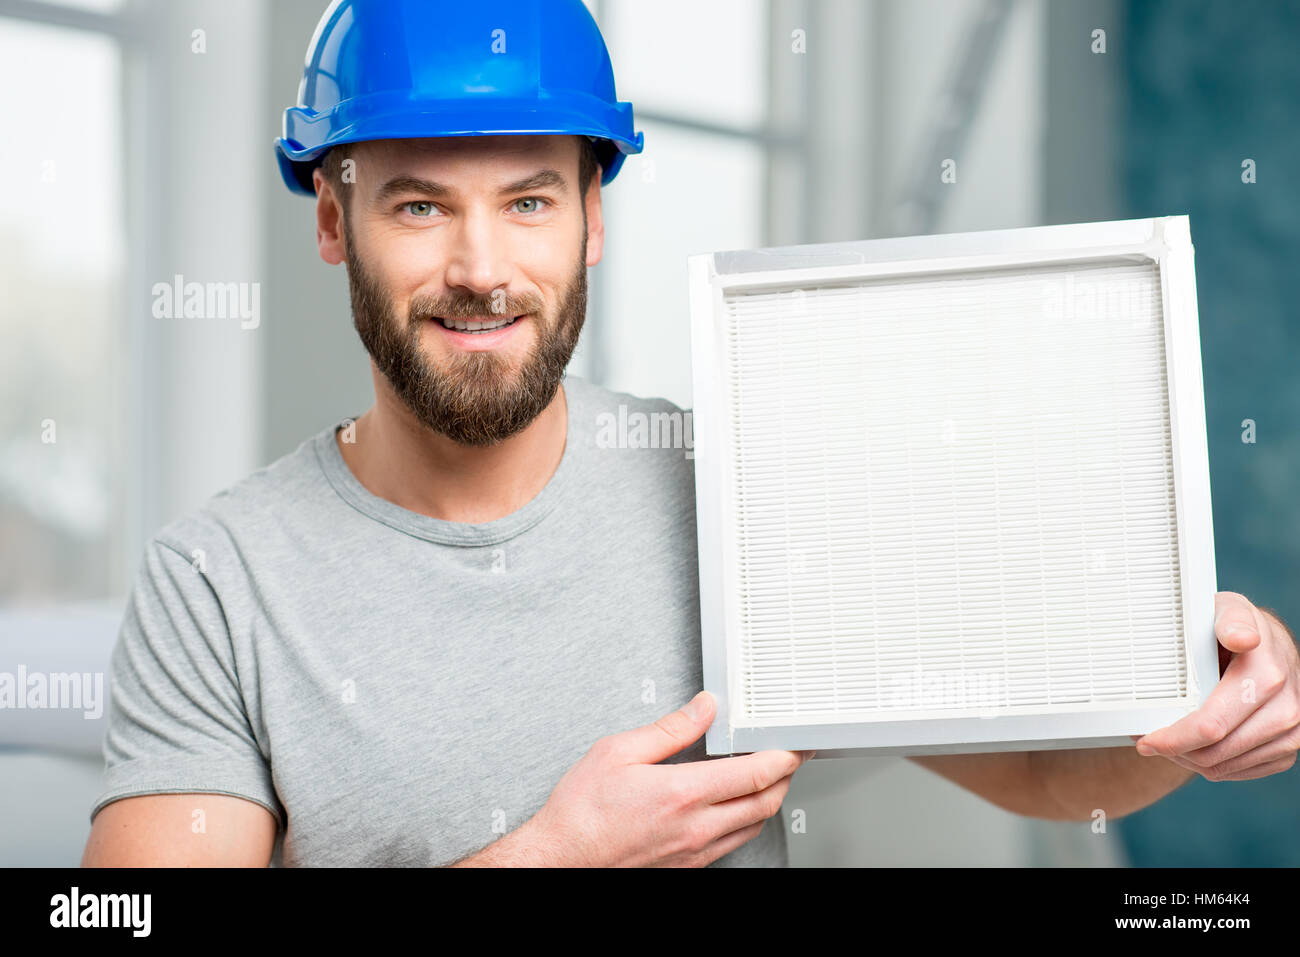 Worker with air filter Stock Photo